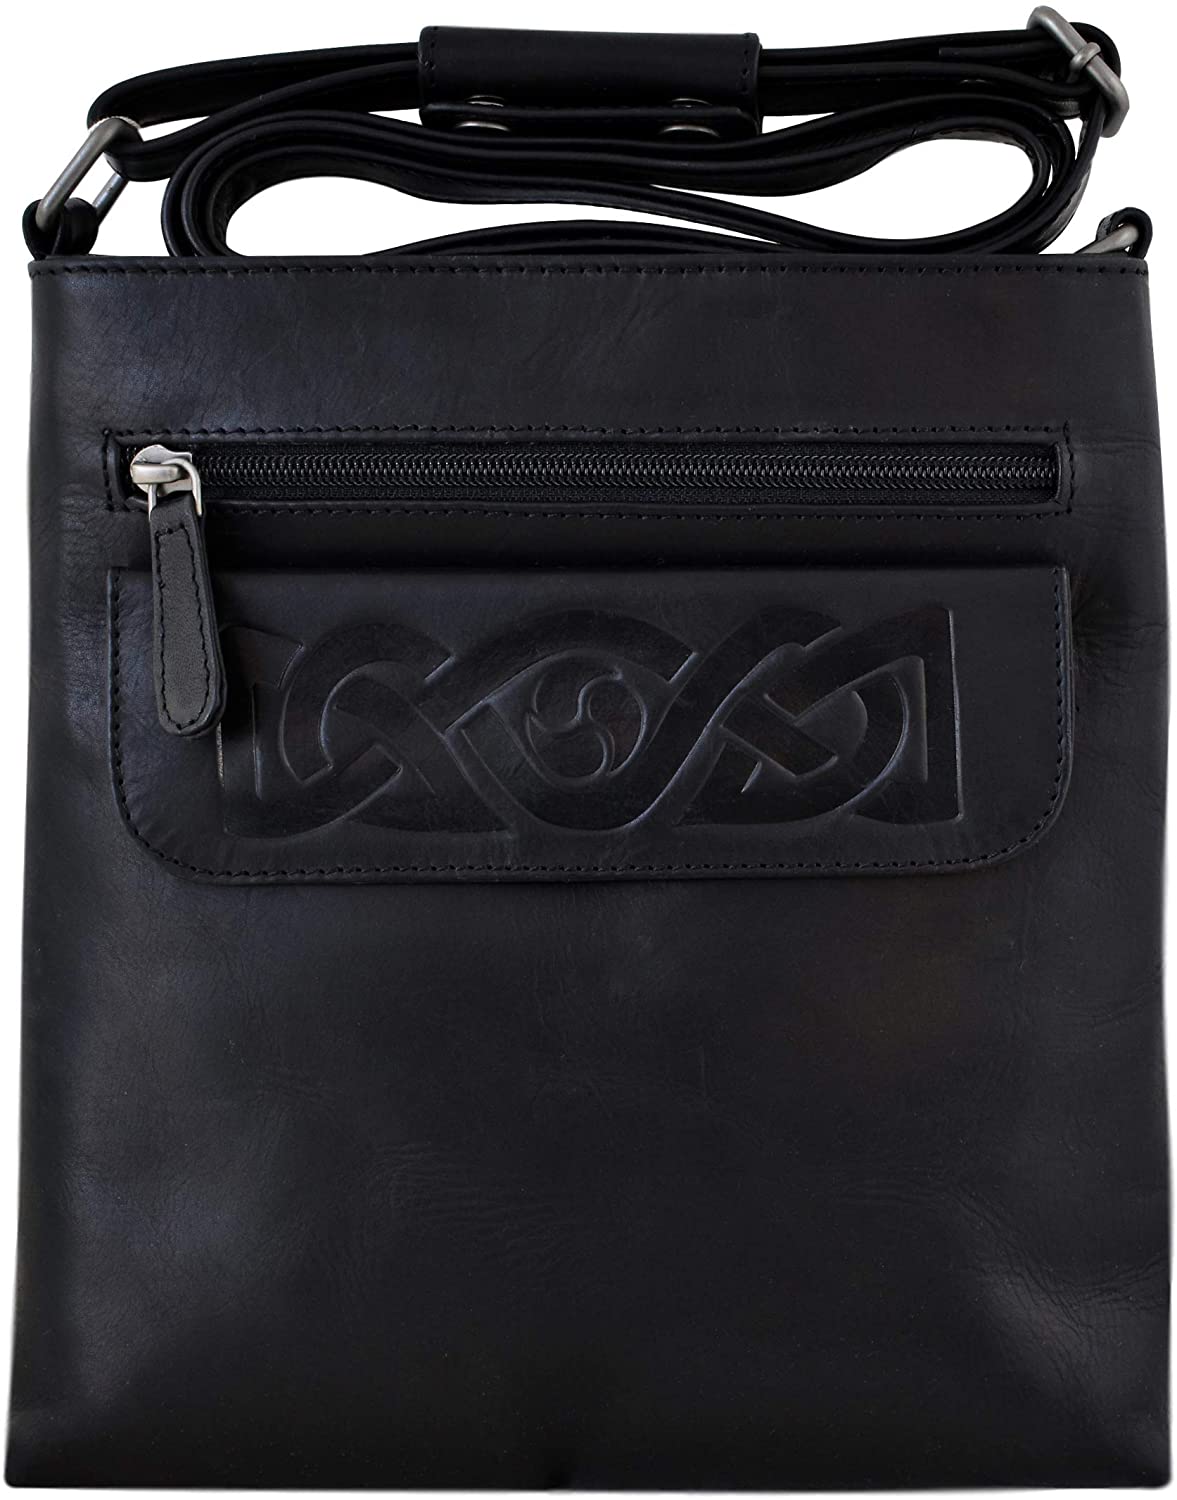 Lee River "Mary" Leather Cross Body Bag